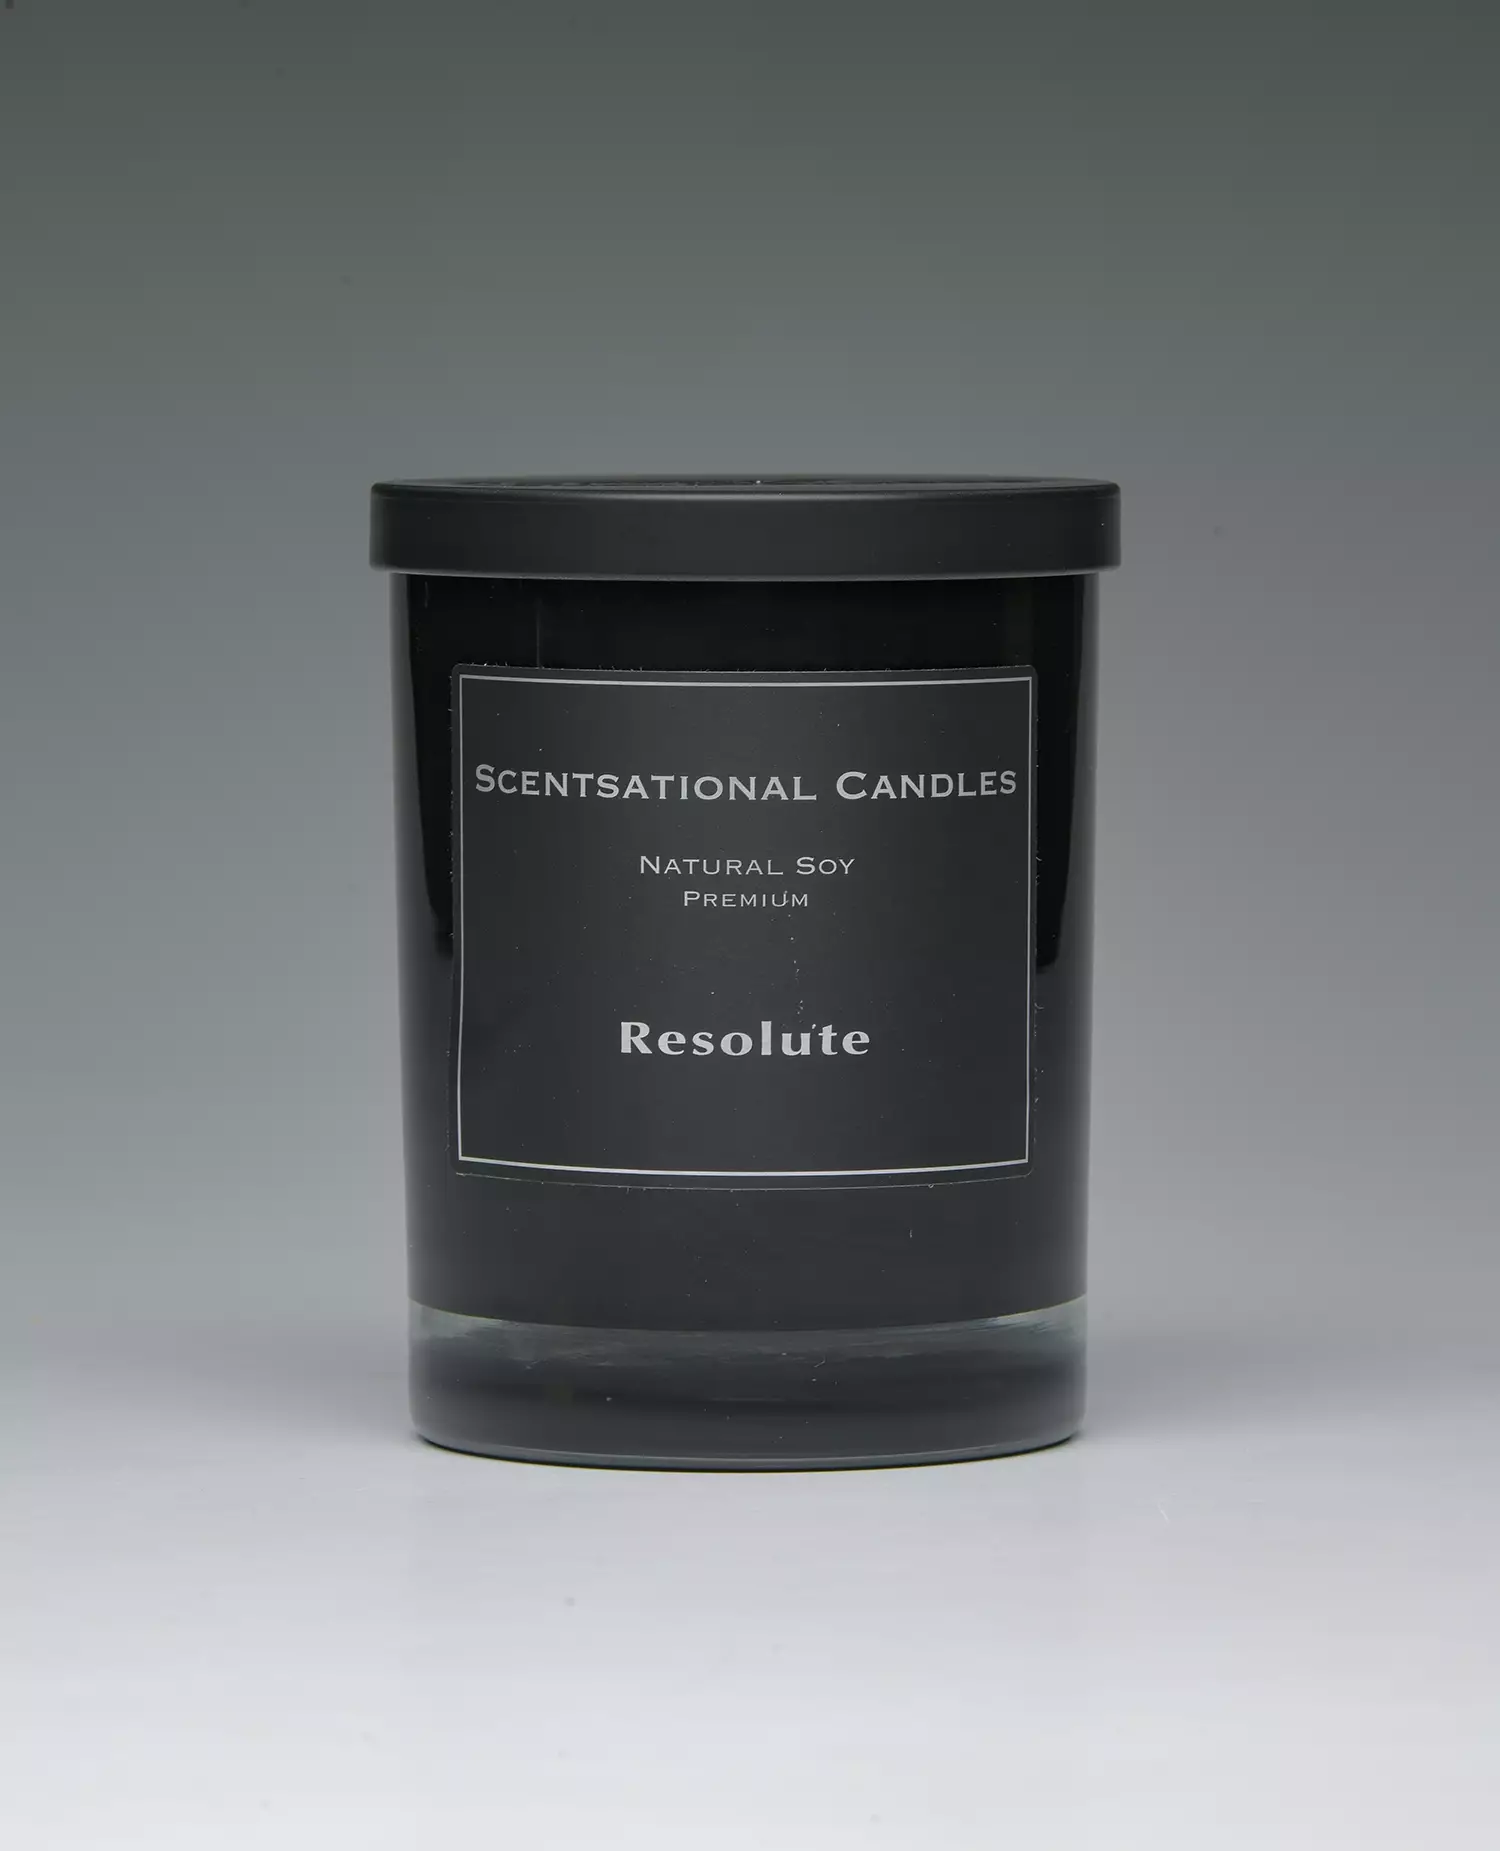 Resolute - 11oz scented candle